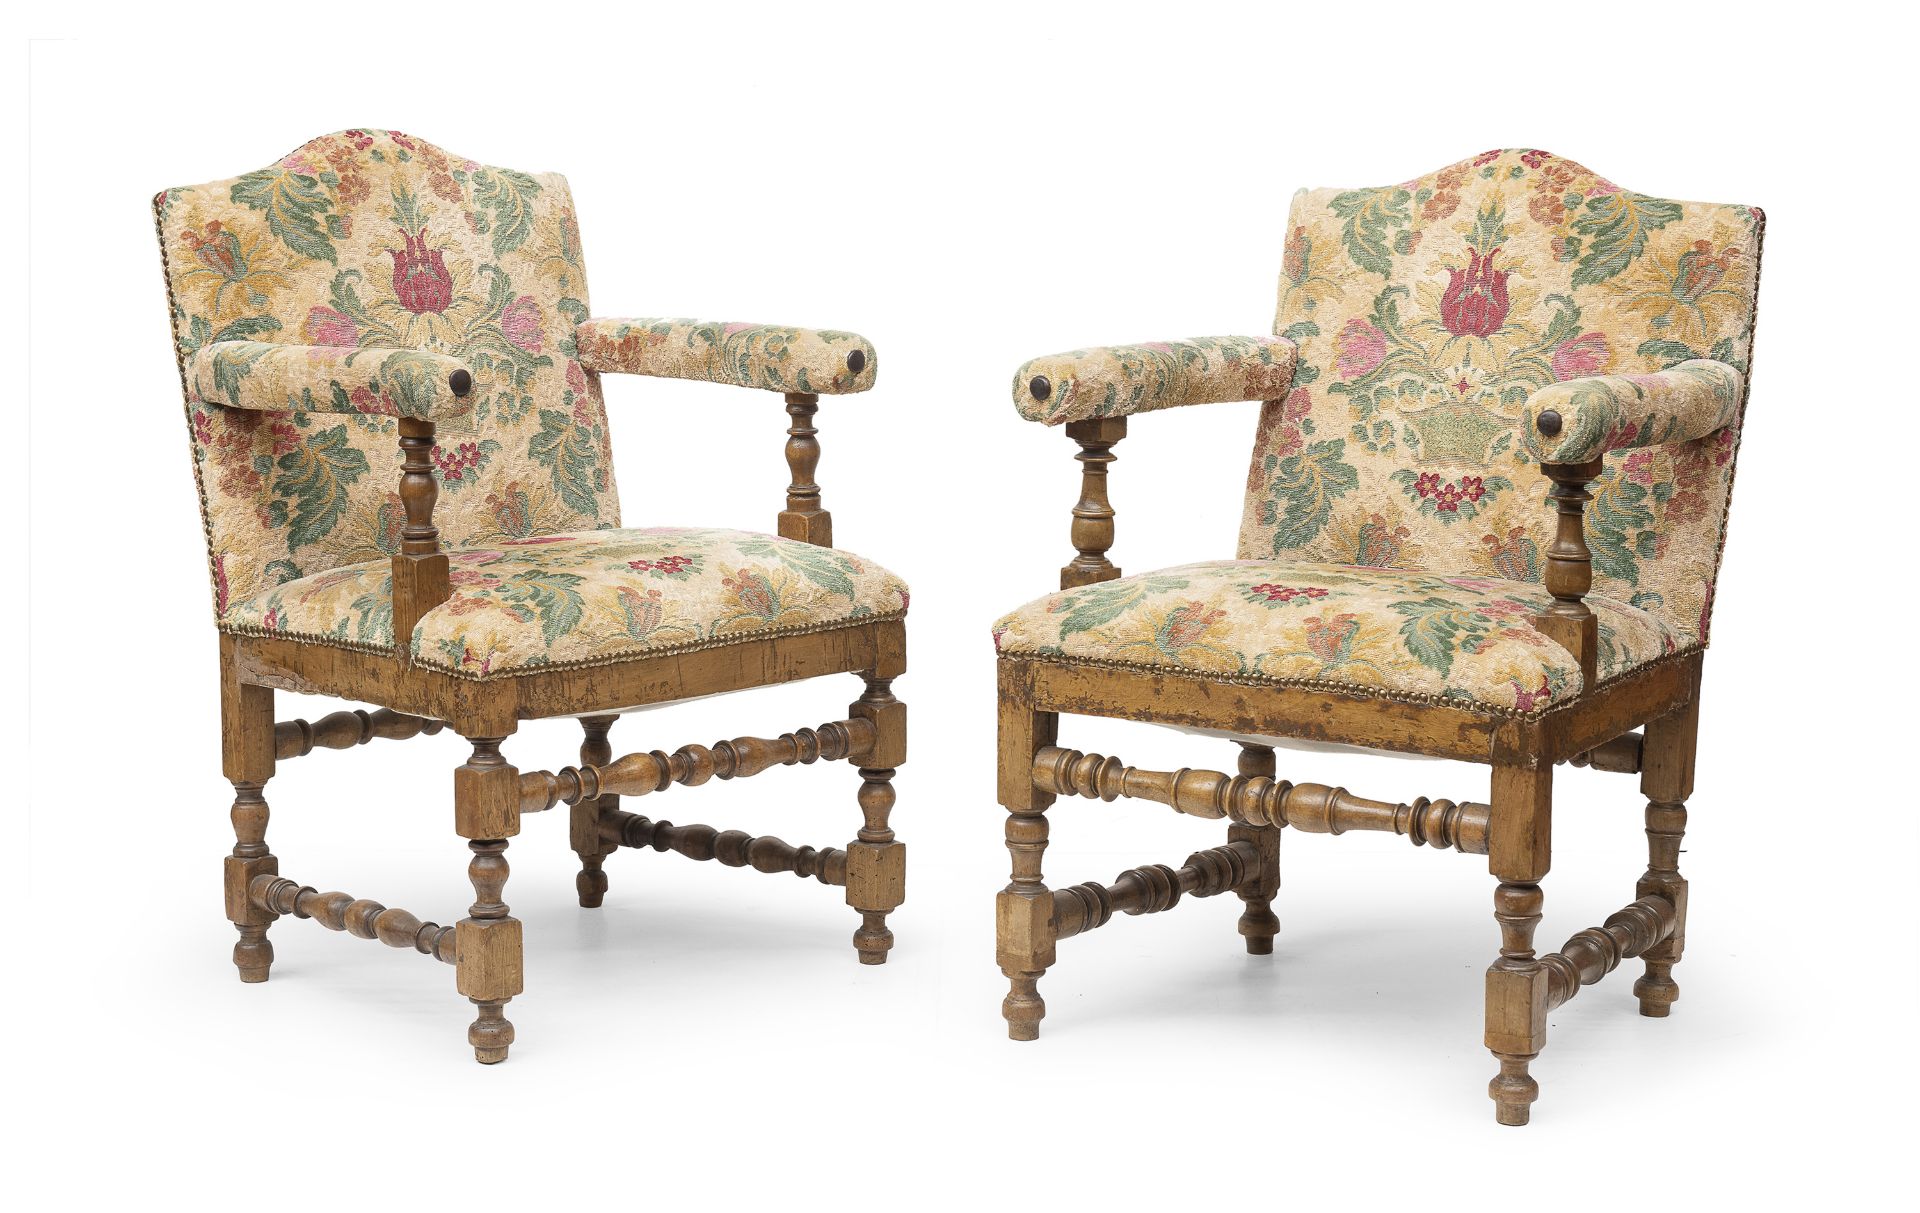 PAIR OF WALNUT ARMCHAIRS PROBABLY FRANCE 18th CENTURY